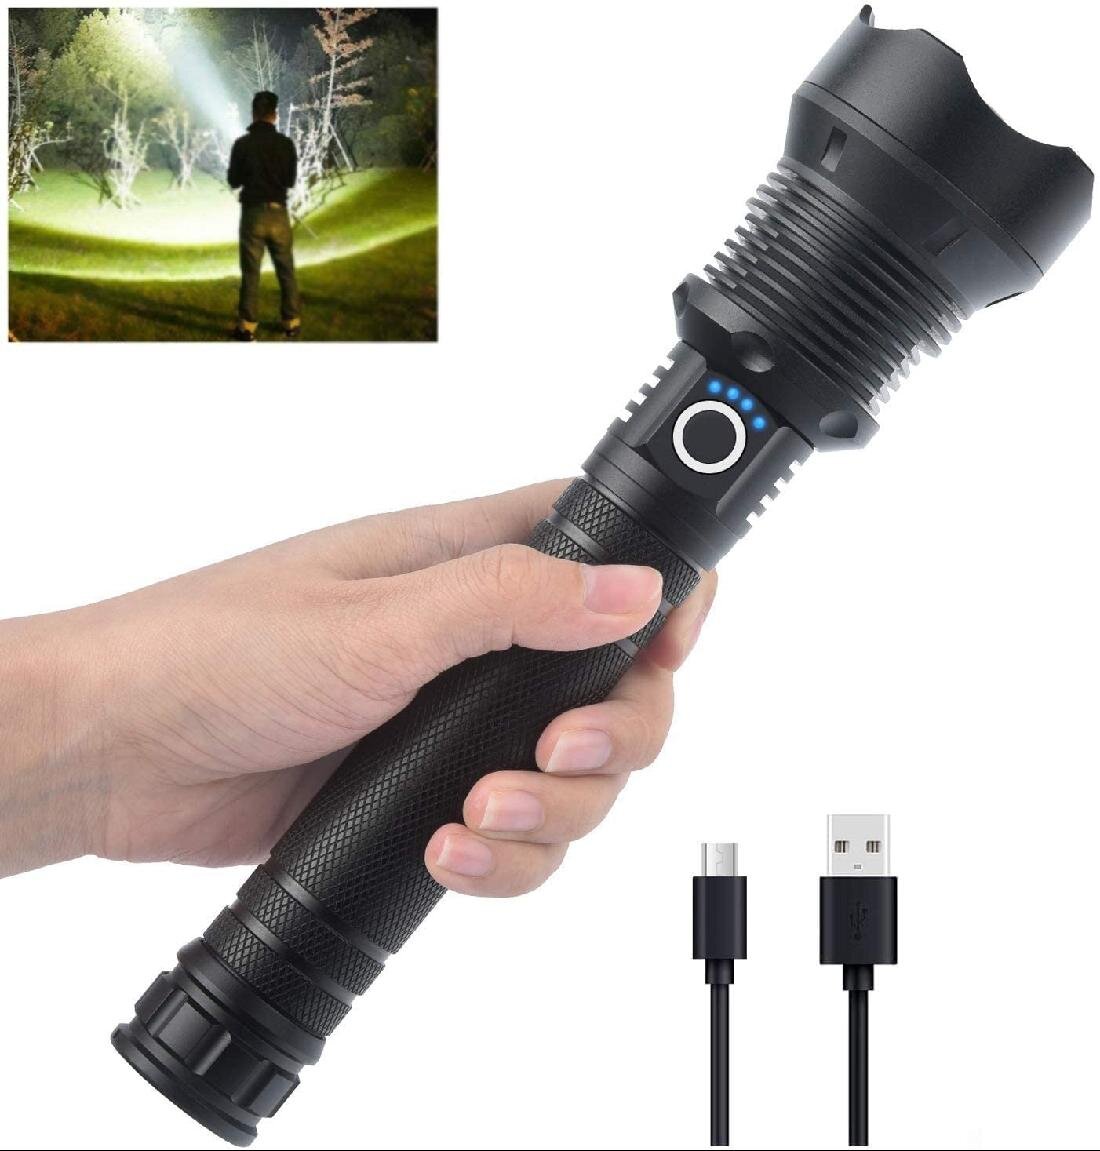 Batteries Included IPX5 Waterproof LED Flashlight Zoomable Rechargeable Tactical Flashlight 90000 High Lumens,5 Modes Power Bank Bright Flashlight for Outdoor/Indoor/Emergencies